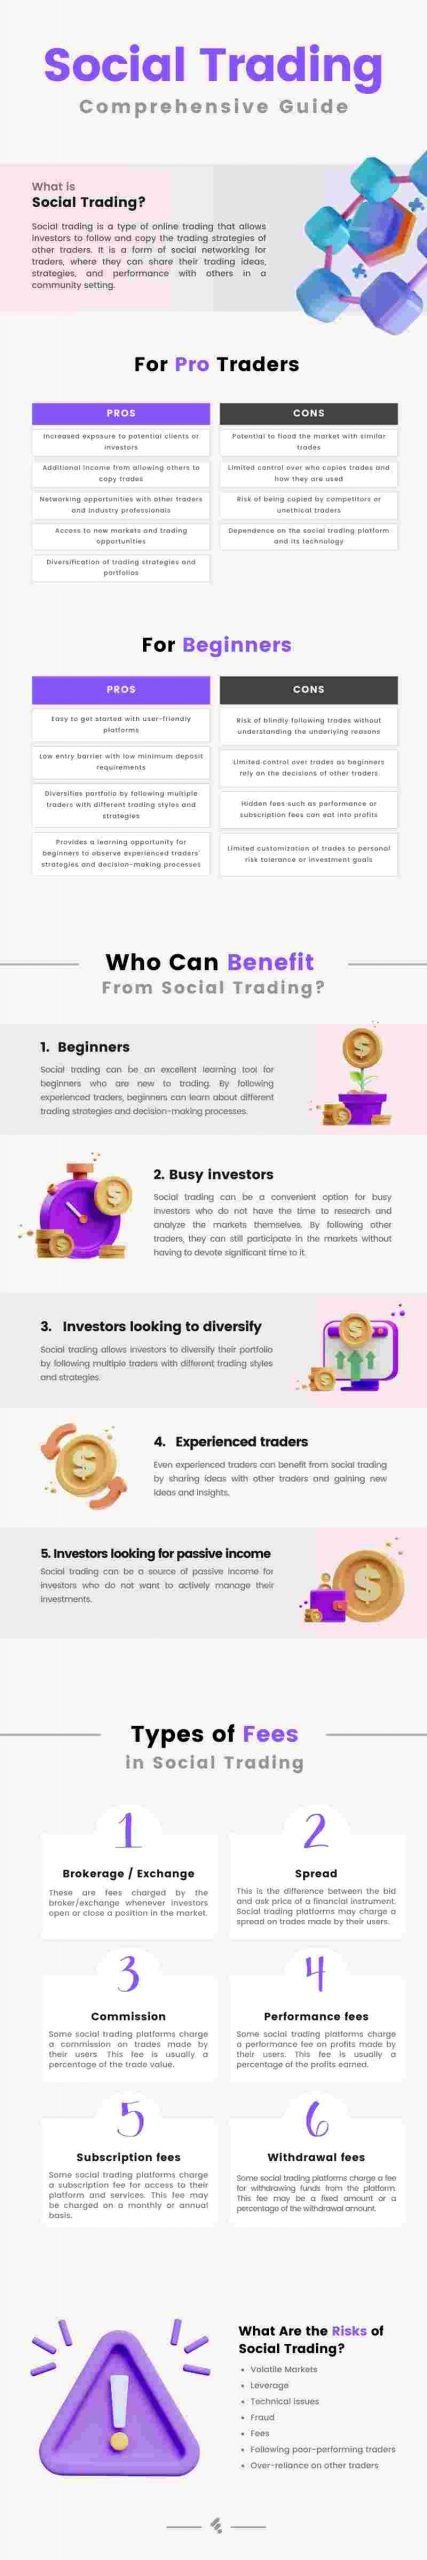 what is social trading Infographic